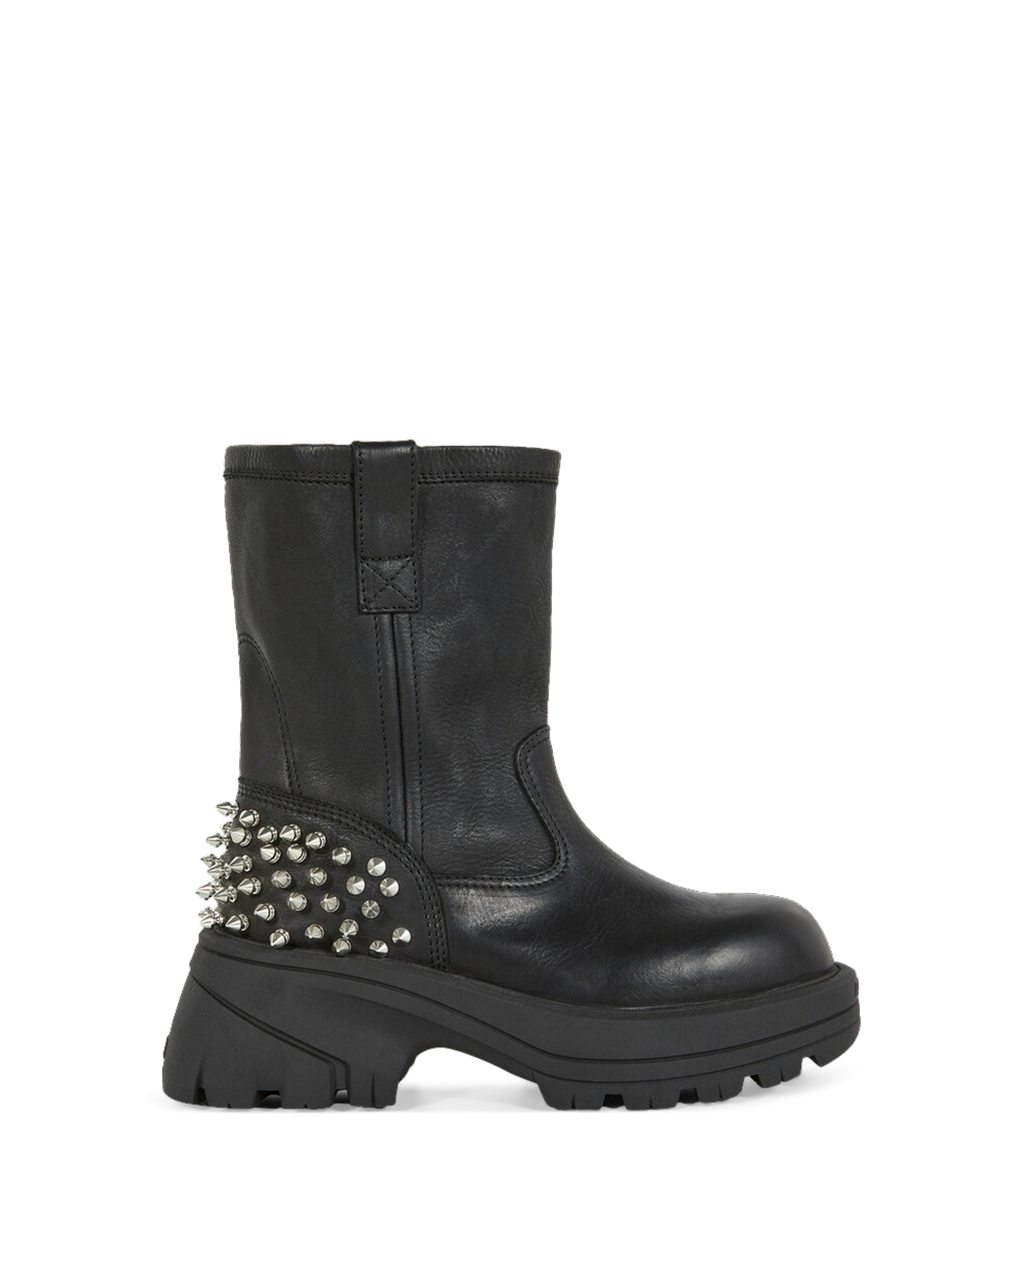 WORK BOOT WITH STUDS (C)